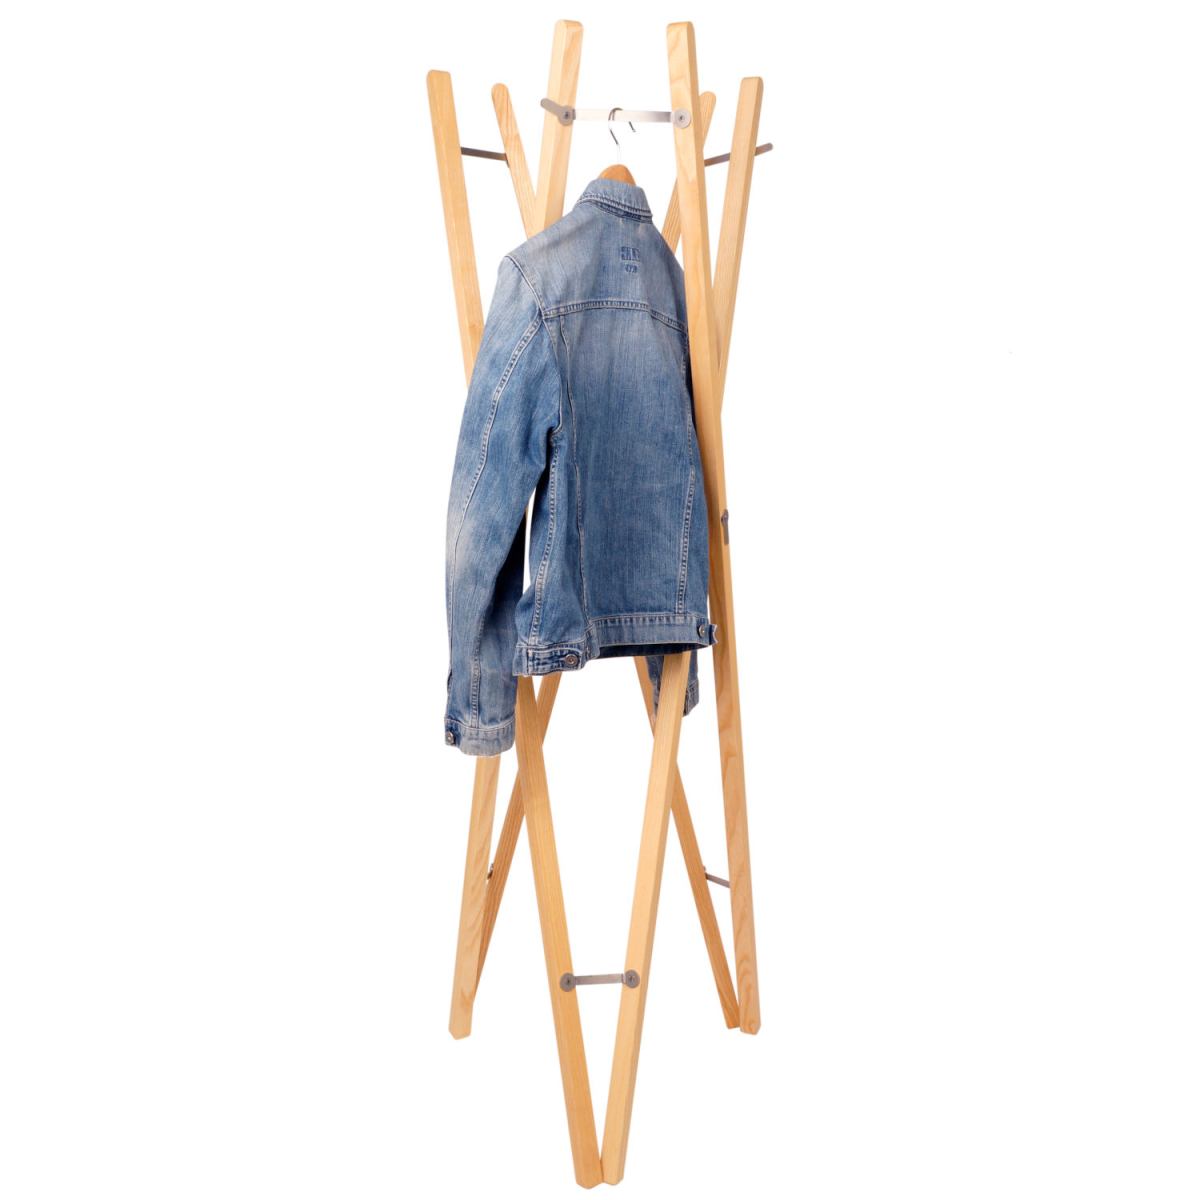 Collapsable Design Clothes Rack made of Solid Wood